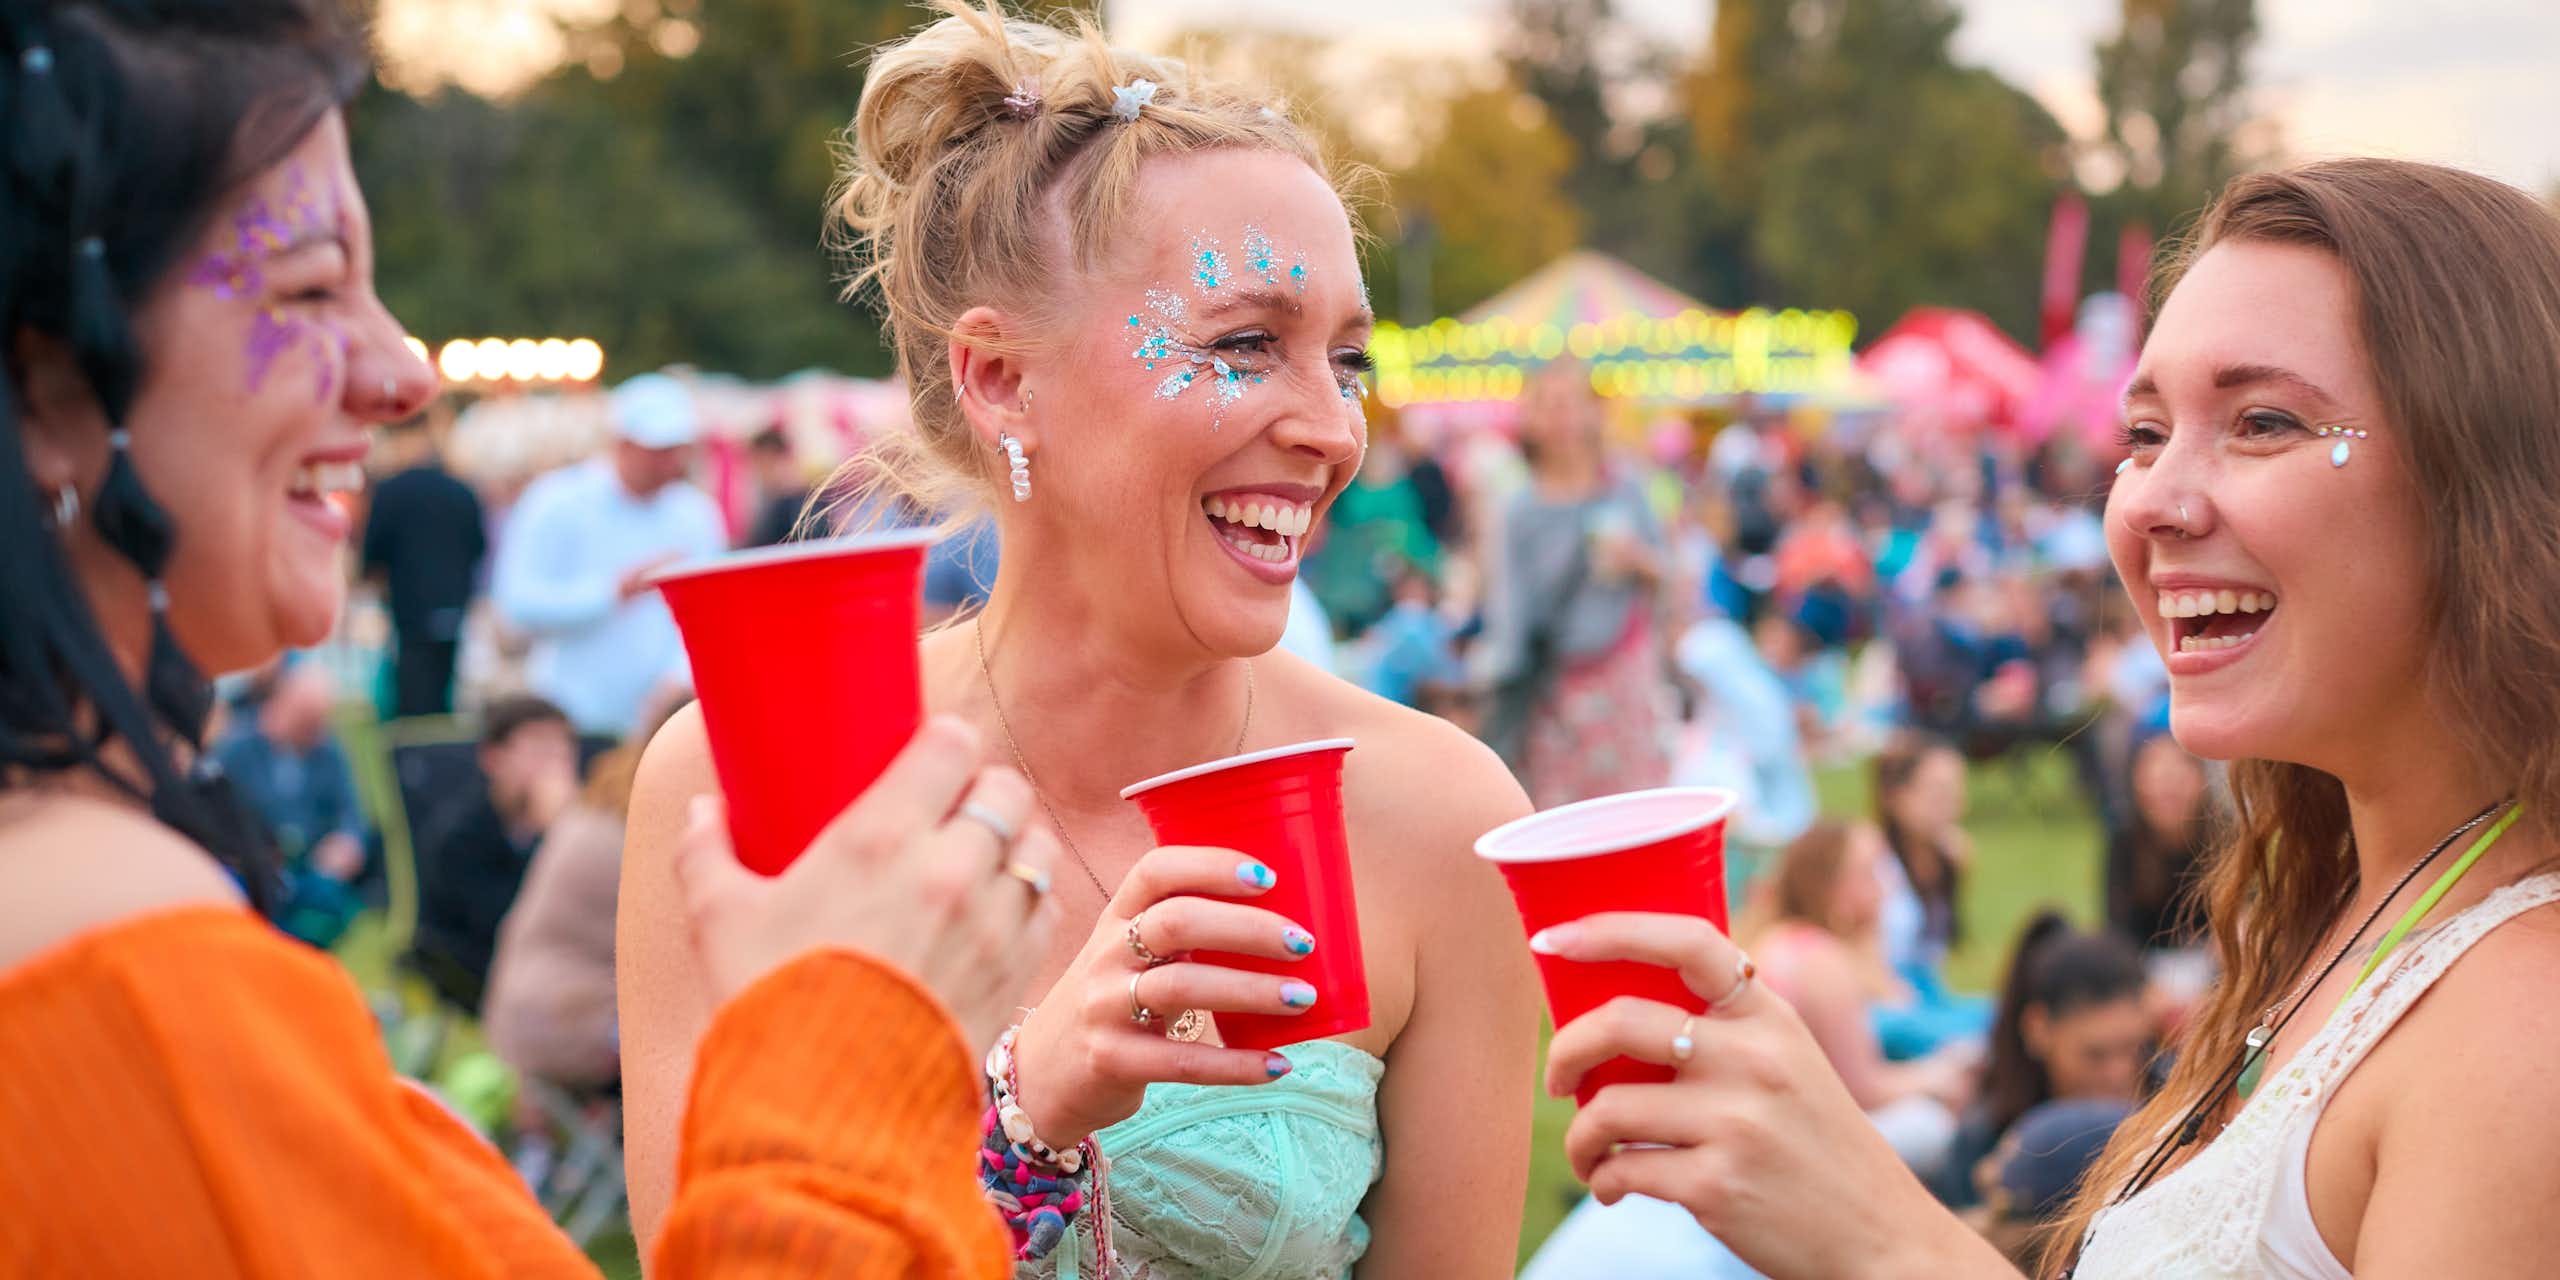 Headed to Glasto? How to stay healthy in the festival heat